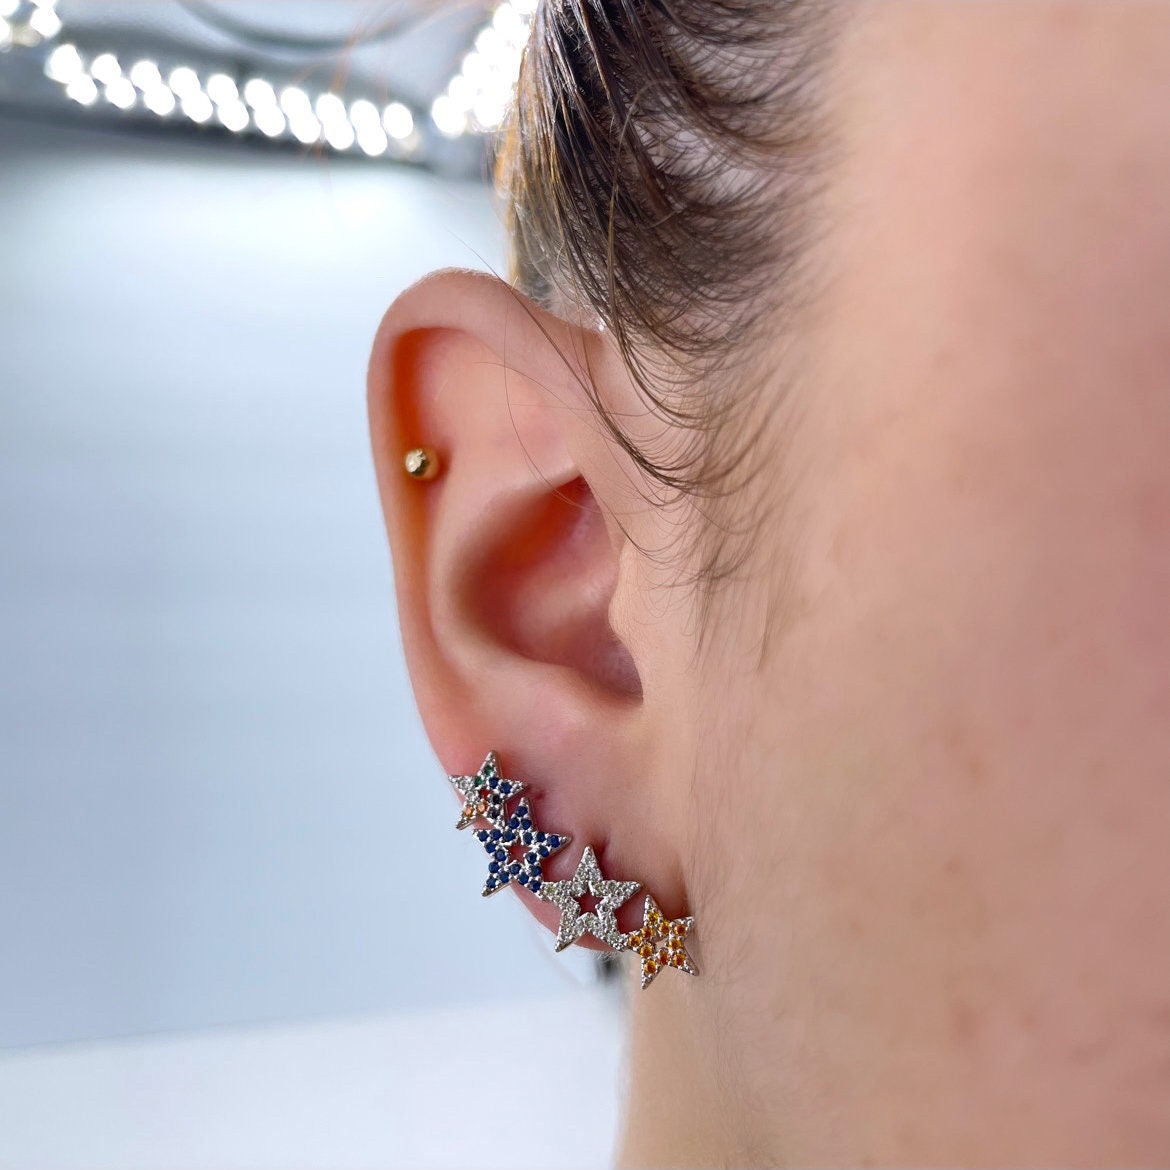 18k Gold Filled or Silver Filled, Colored CZ Stars Ear Climber Design, Ear Jacket, Front Back Stud Earrings, Double Sided Wholesale Jewelry